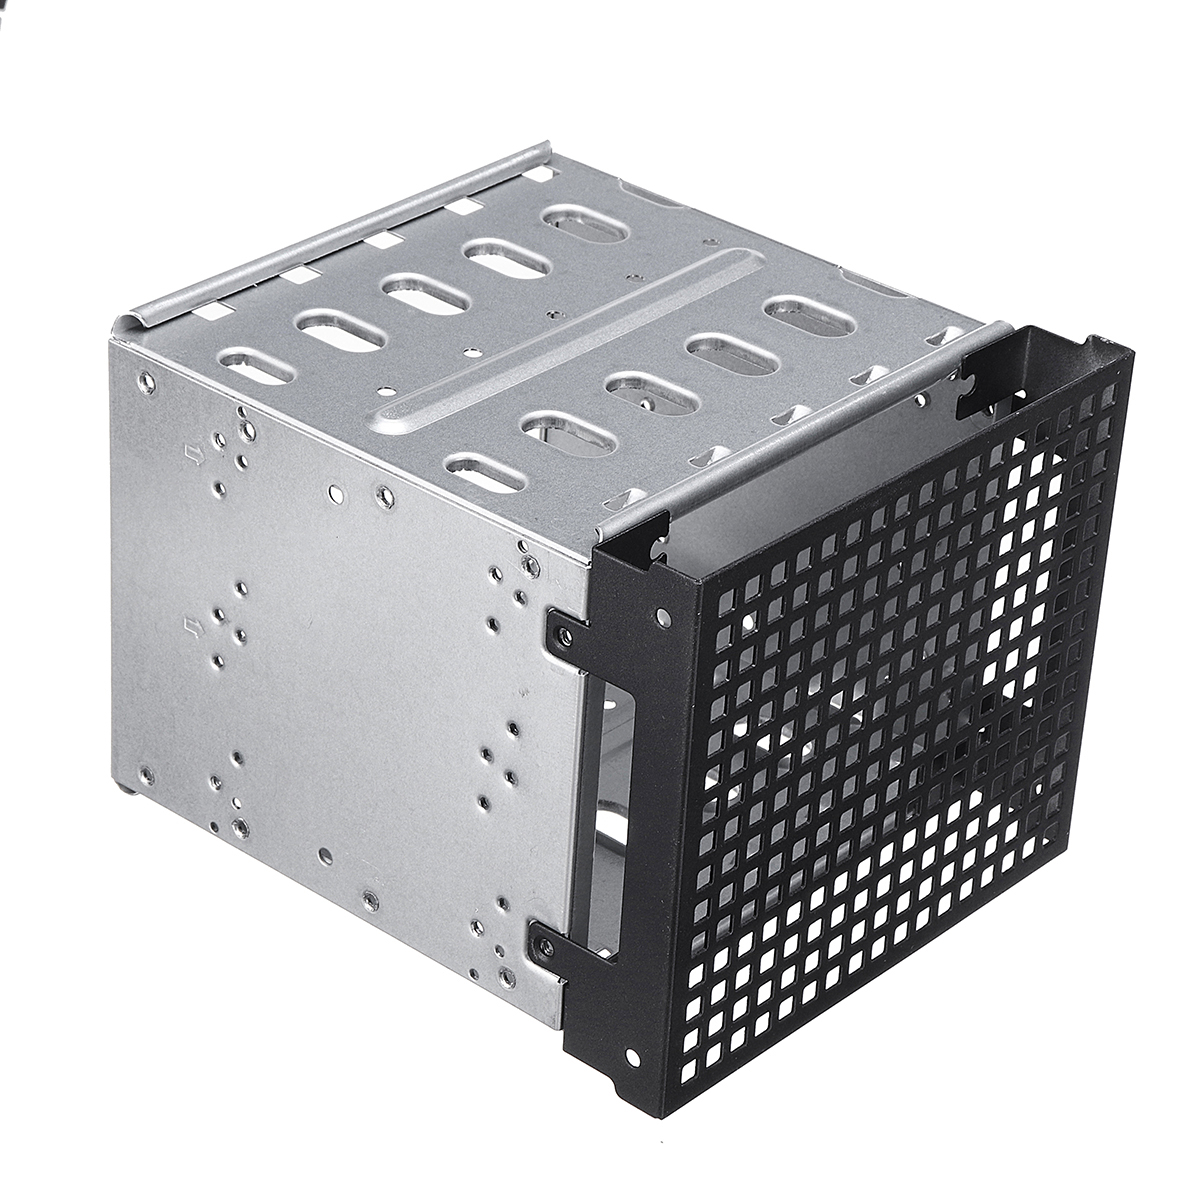 5.25" to 5x 3.5" SATA SAS HDD Cage Rack Hard Drive Tray Caddy Converter with Fan Space 48